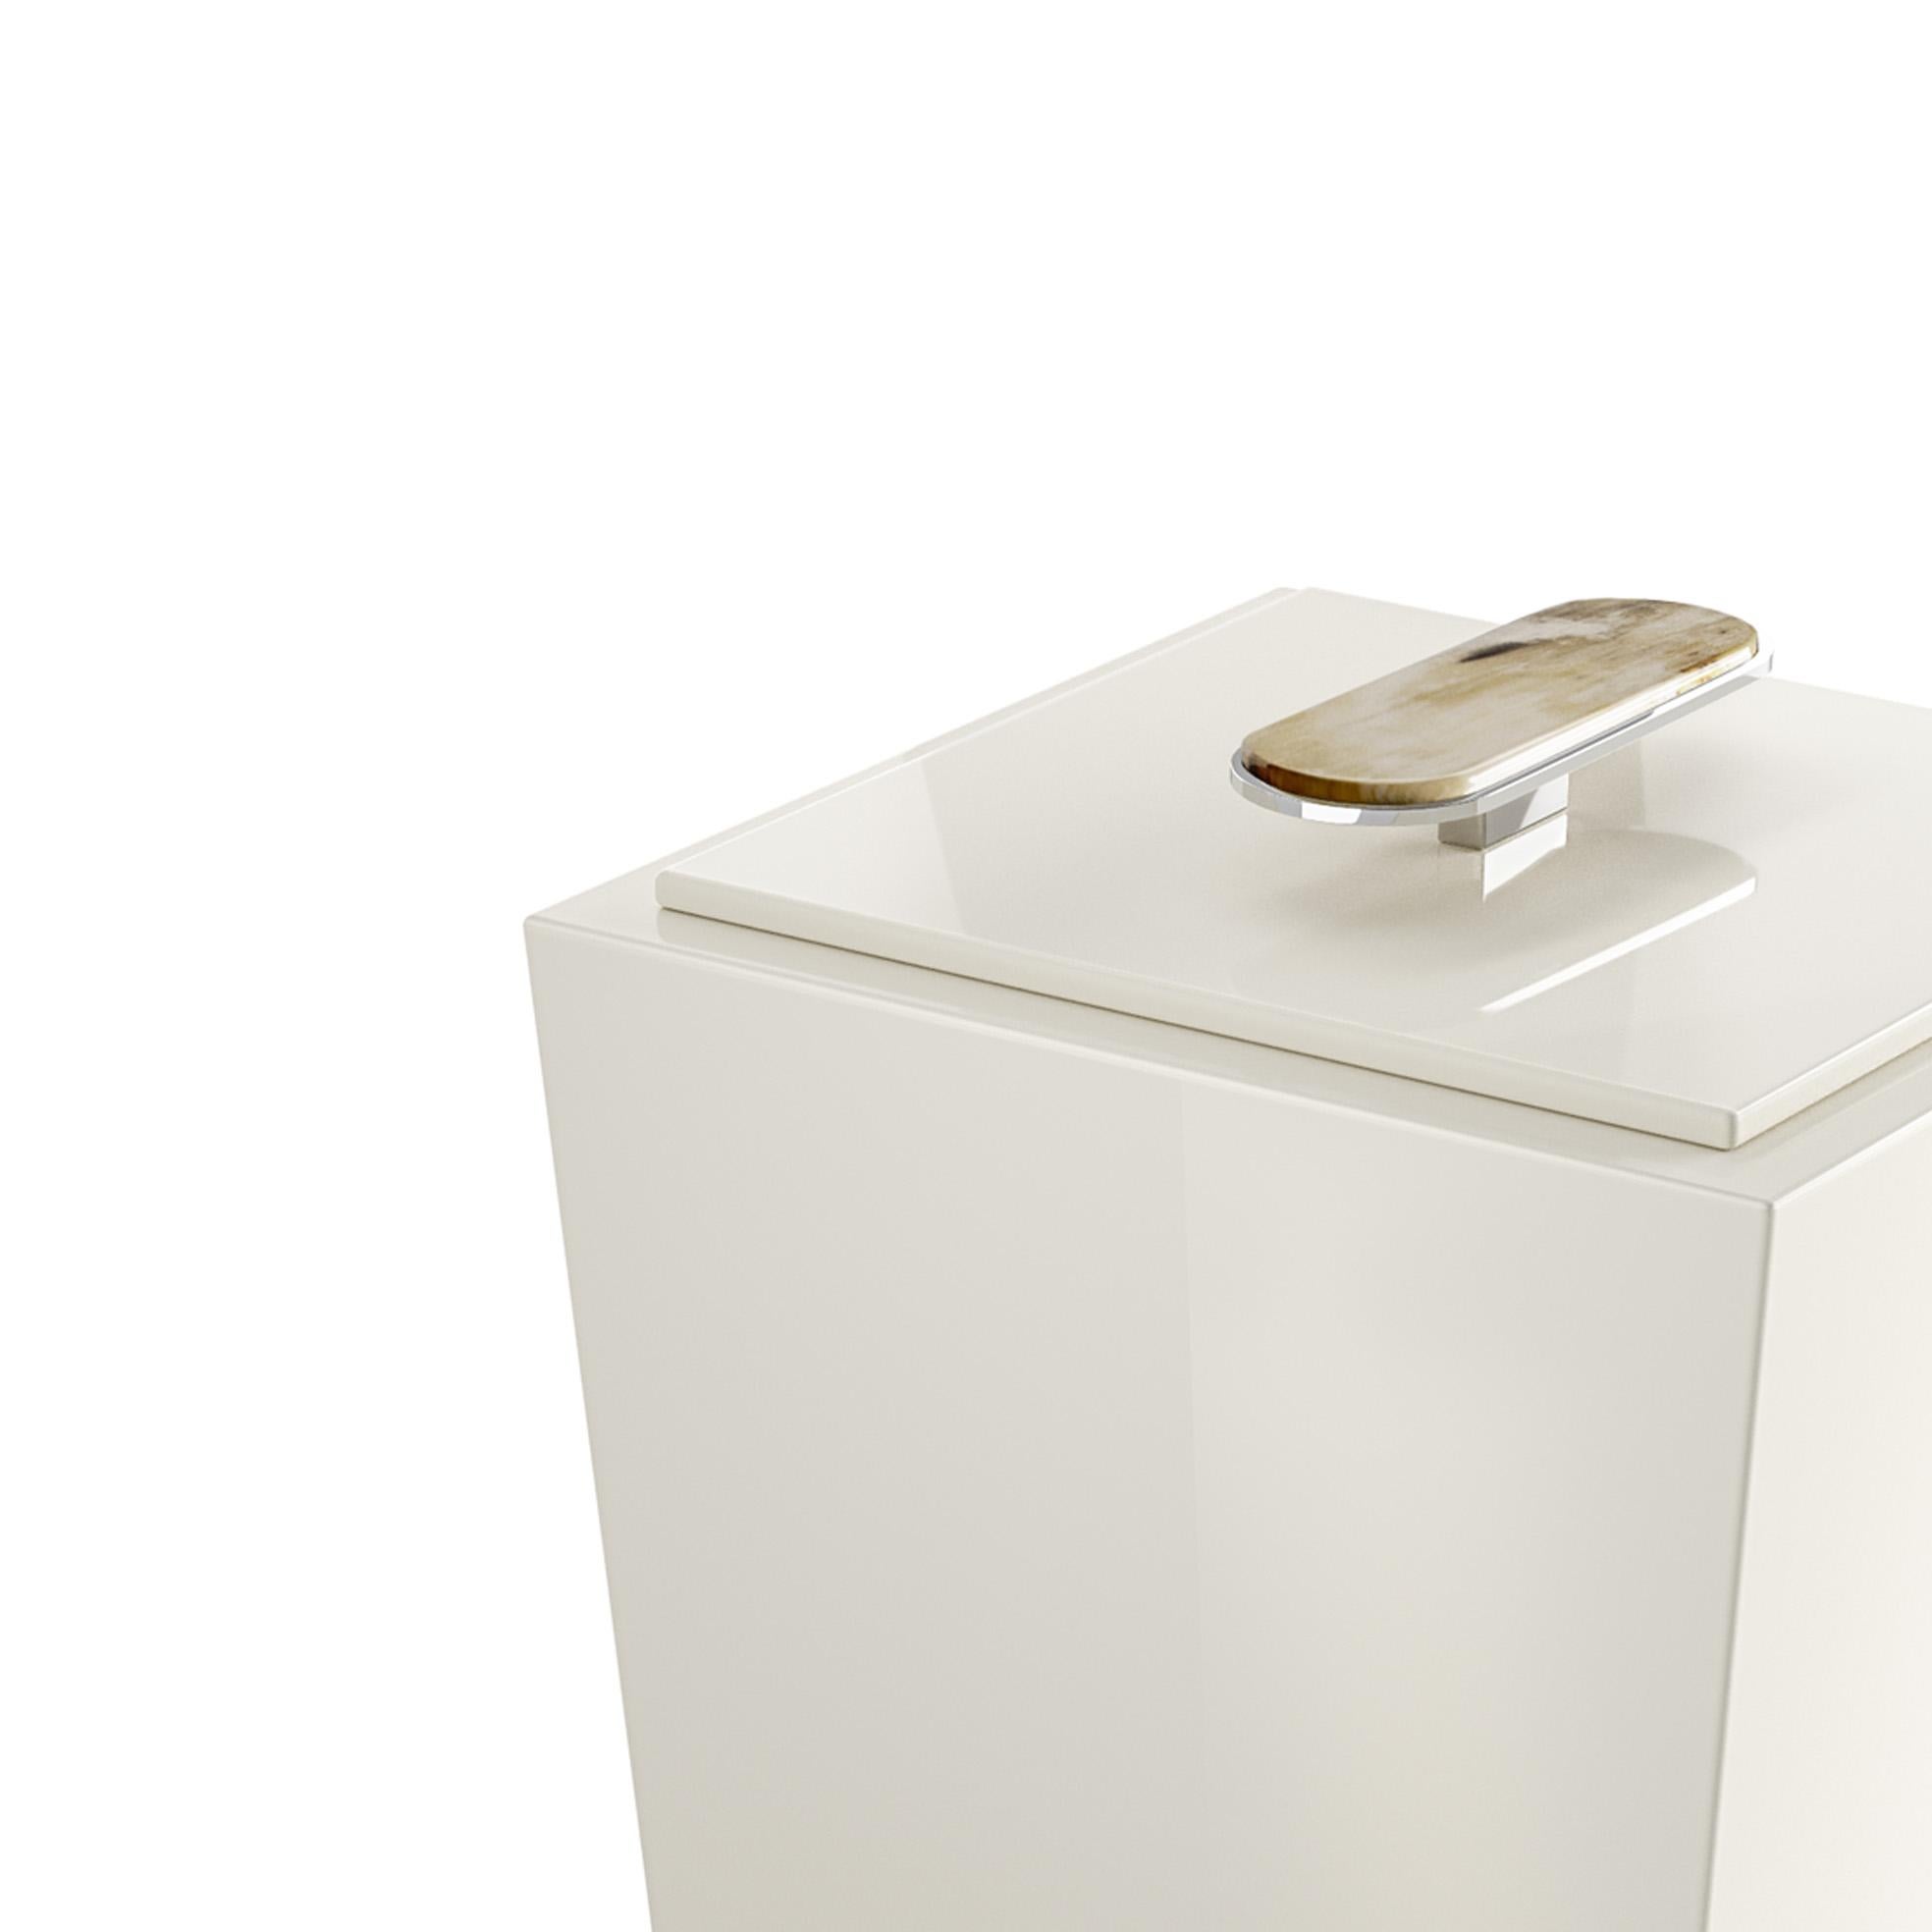 Polished Bicco Waste Paper Basket in Ivory Lacquered Wood and Corno Italiano, Mod. 2425 For Sale